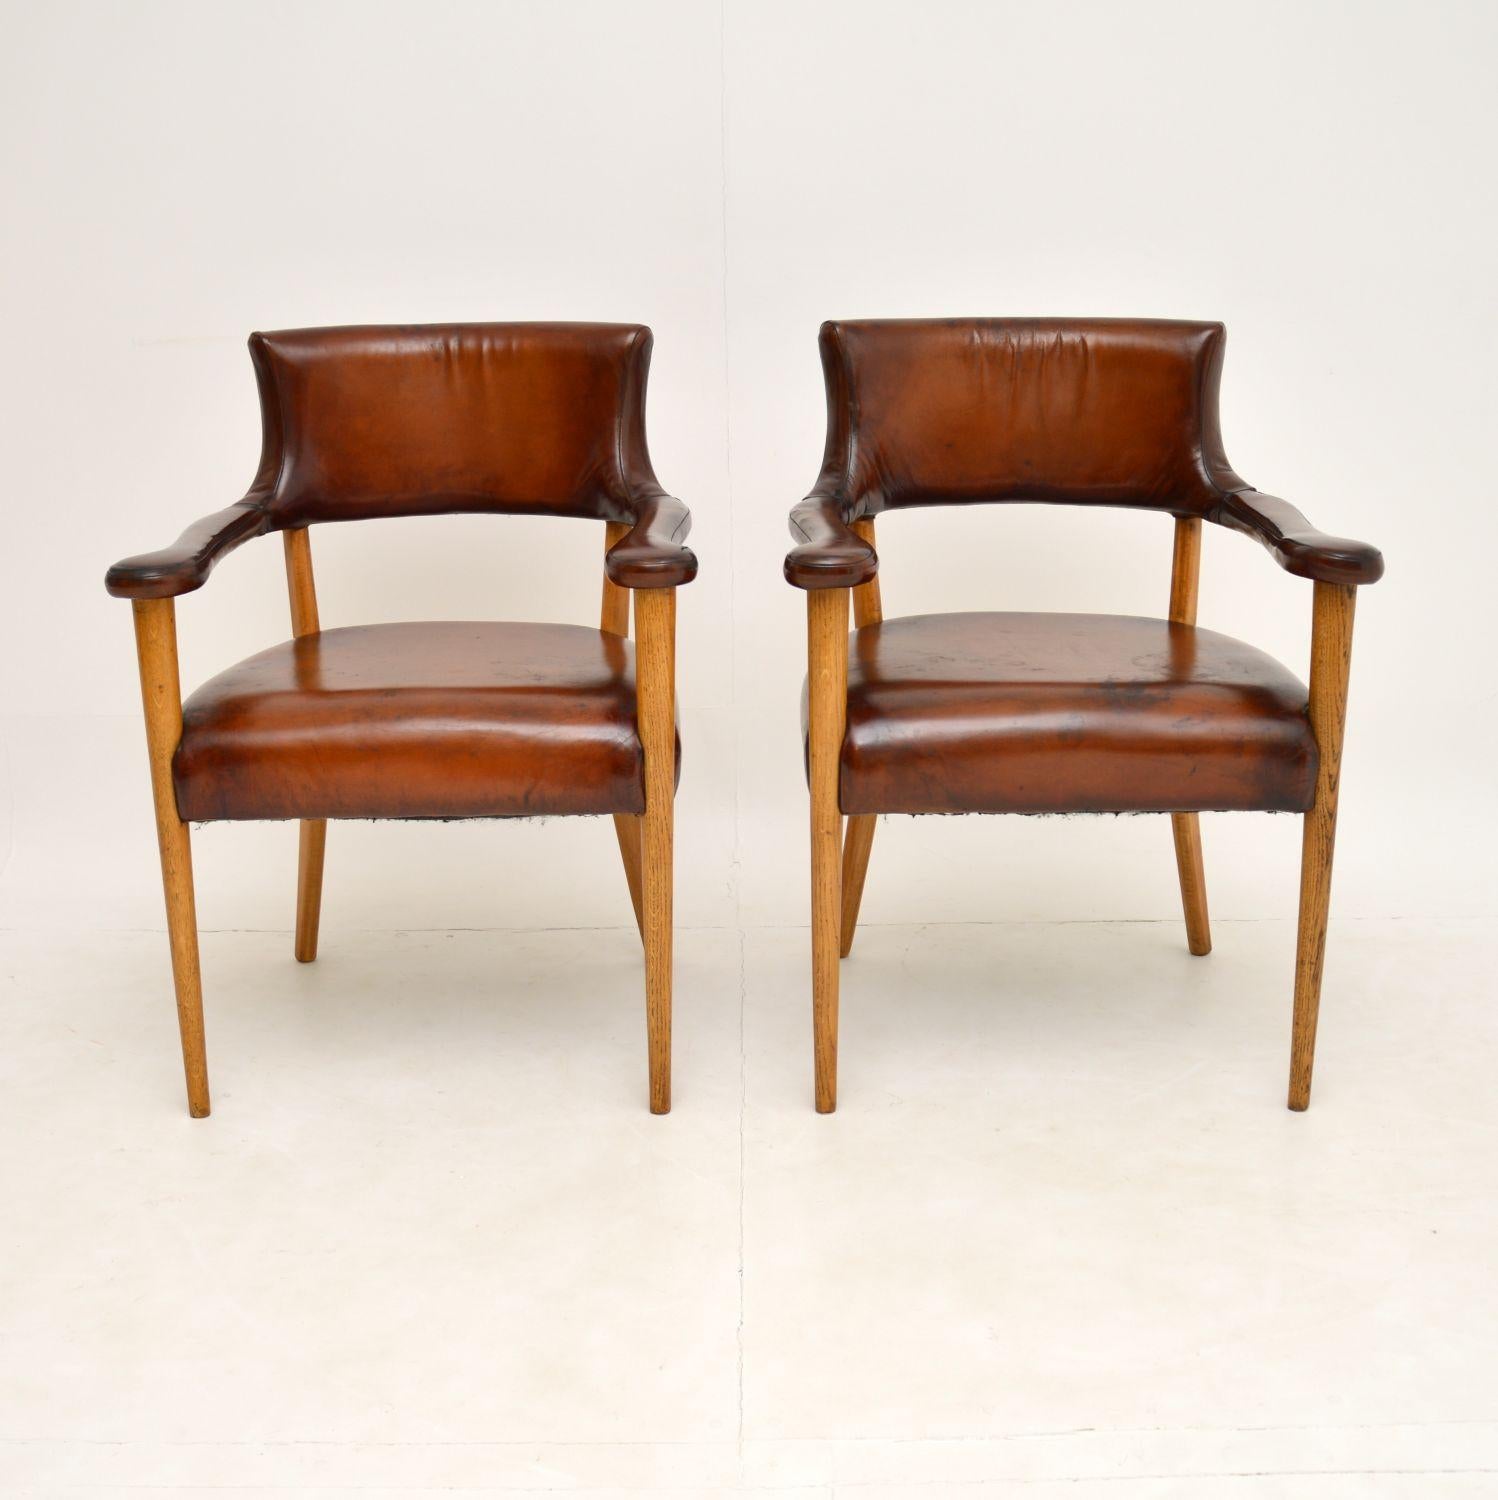 A stunning and very unusual pair of open leather armchairs, dating from around the 1960’s. These look like they could be Danish or Swedish, we are not sure of the origin.

They are beautifully made and designed, with shapely back rests and arms.